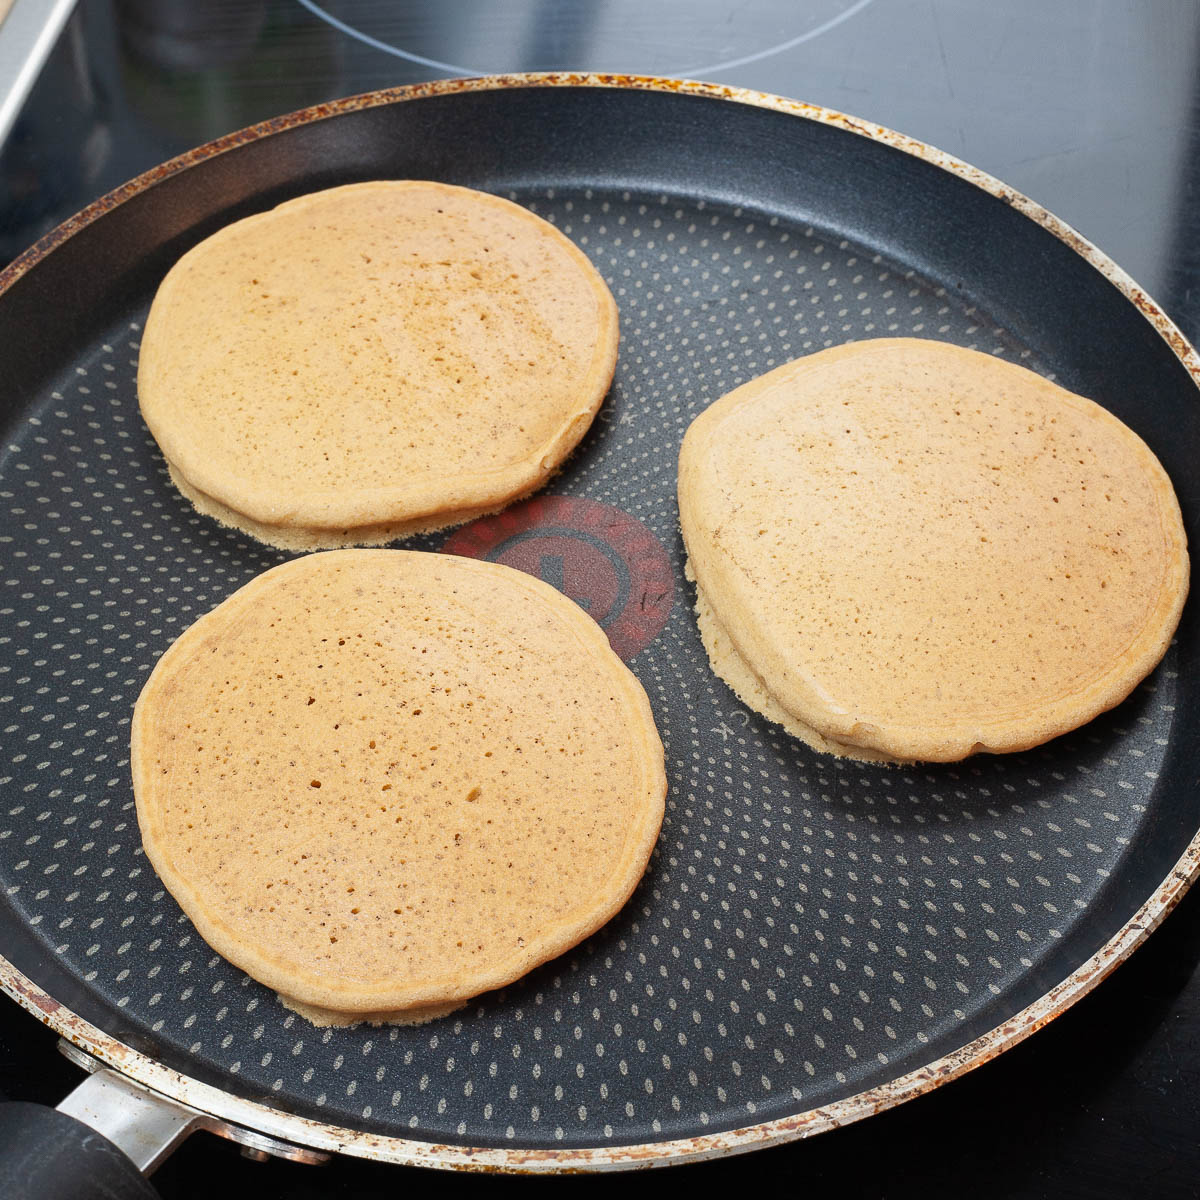 Frying pan with three pancakes that were just turned over.